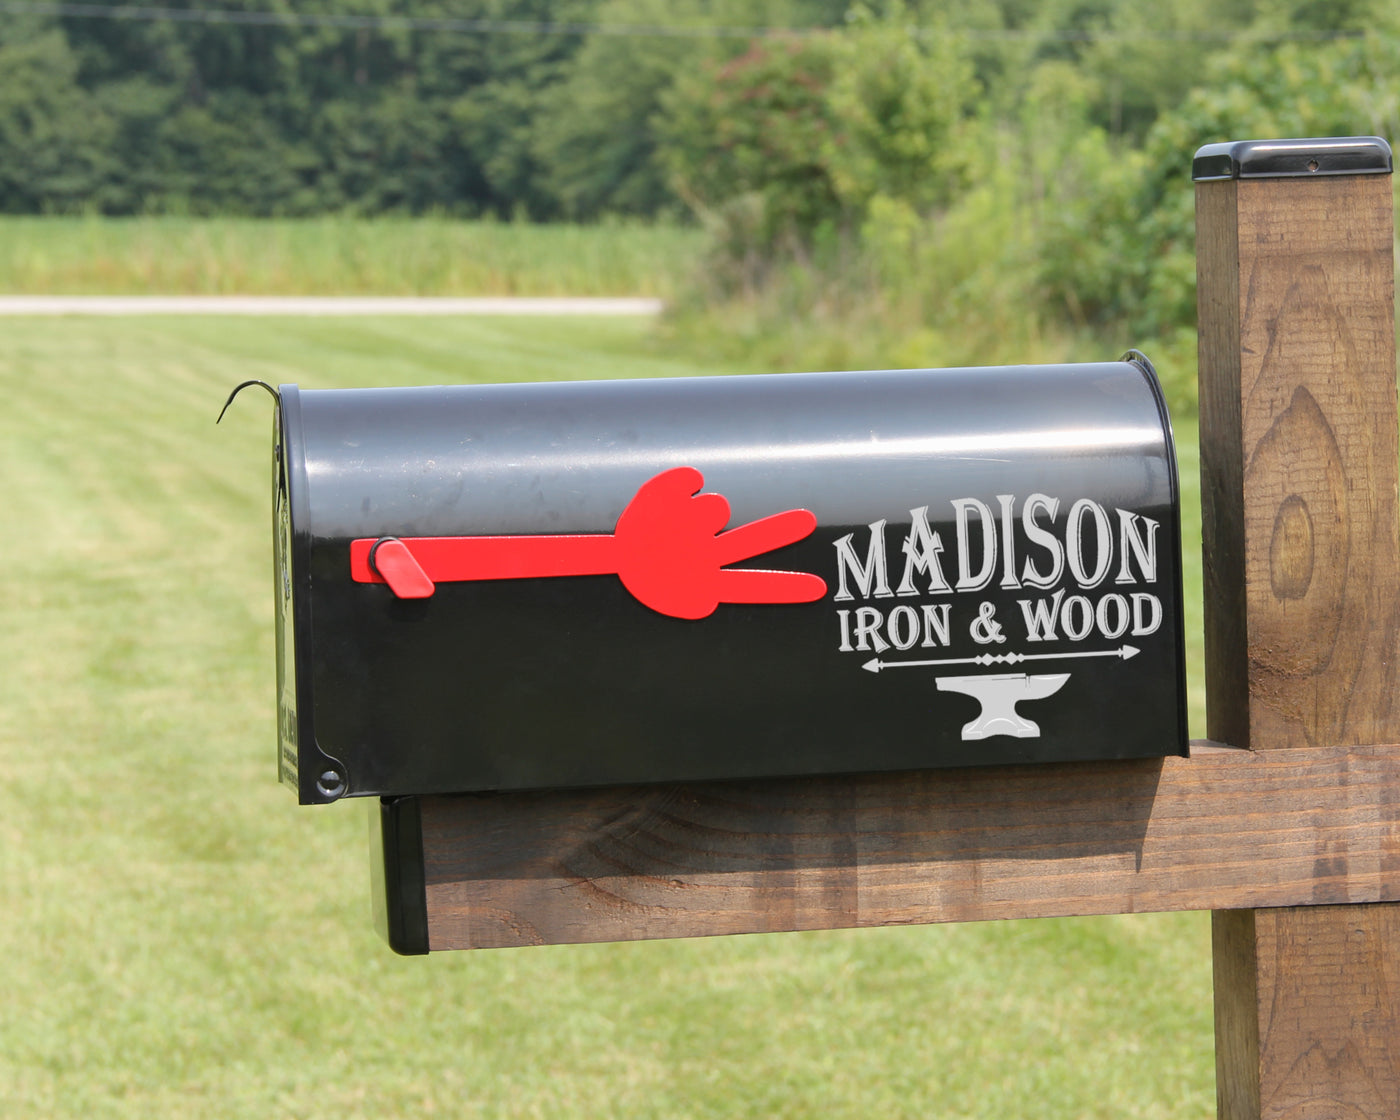 Peace Hand Gesture Mailbox Flag - Madison Iron and Wood - Mailbox Post Decor - metal outdoor decor - Steel deocrations - american made products - veteran owned business products - fencing decorations - fencing supplies - custom wall decorations - personalized wall signs - steel - decorative post caps - steel post caps - metal post caps - brackets - structural brackets - home improvement - easter - easter decorations - easter gift - easter yard decor